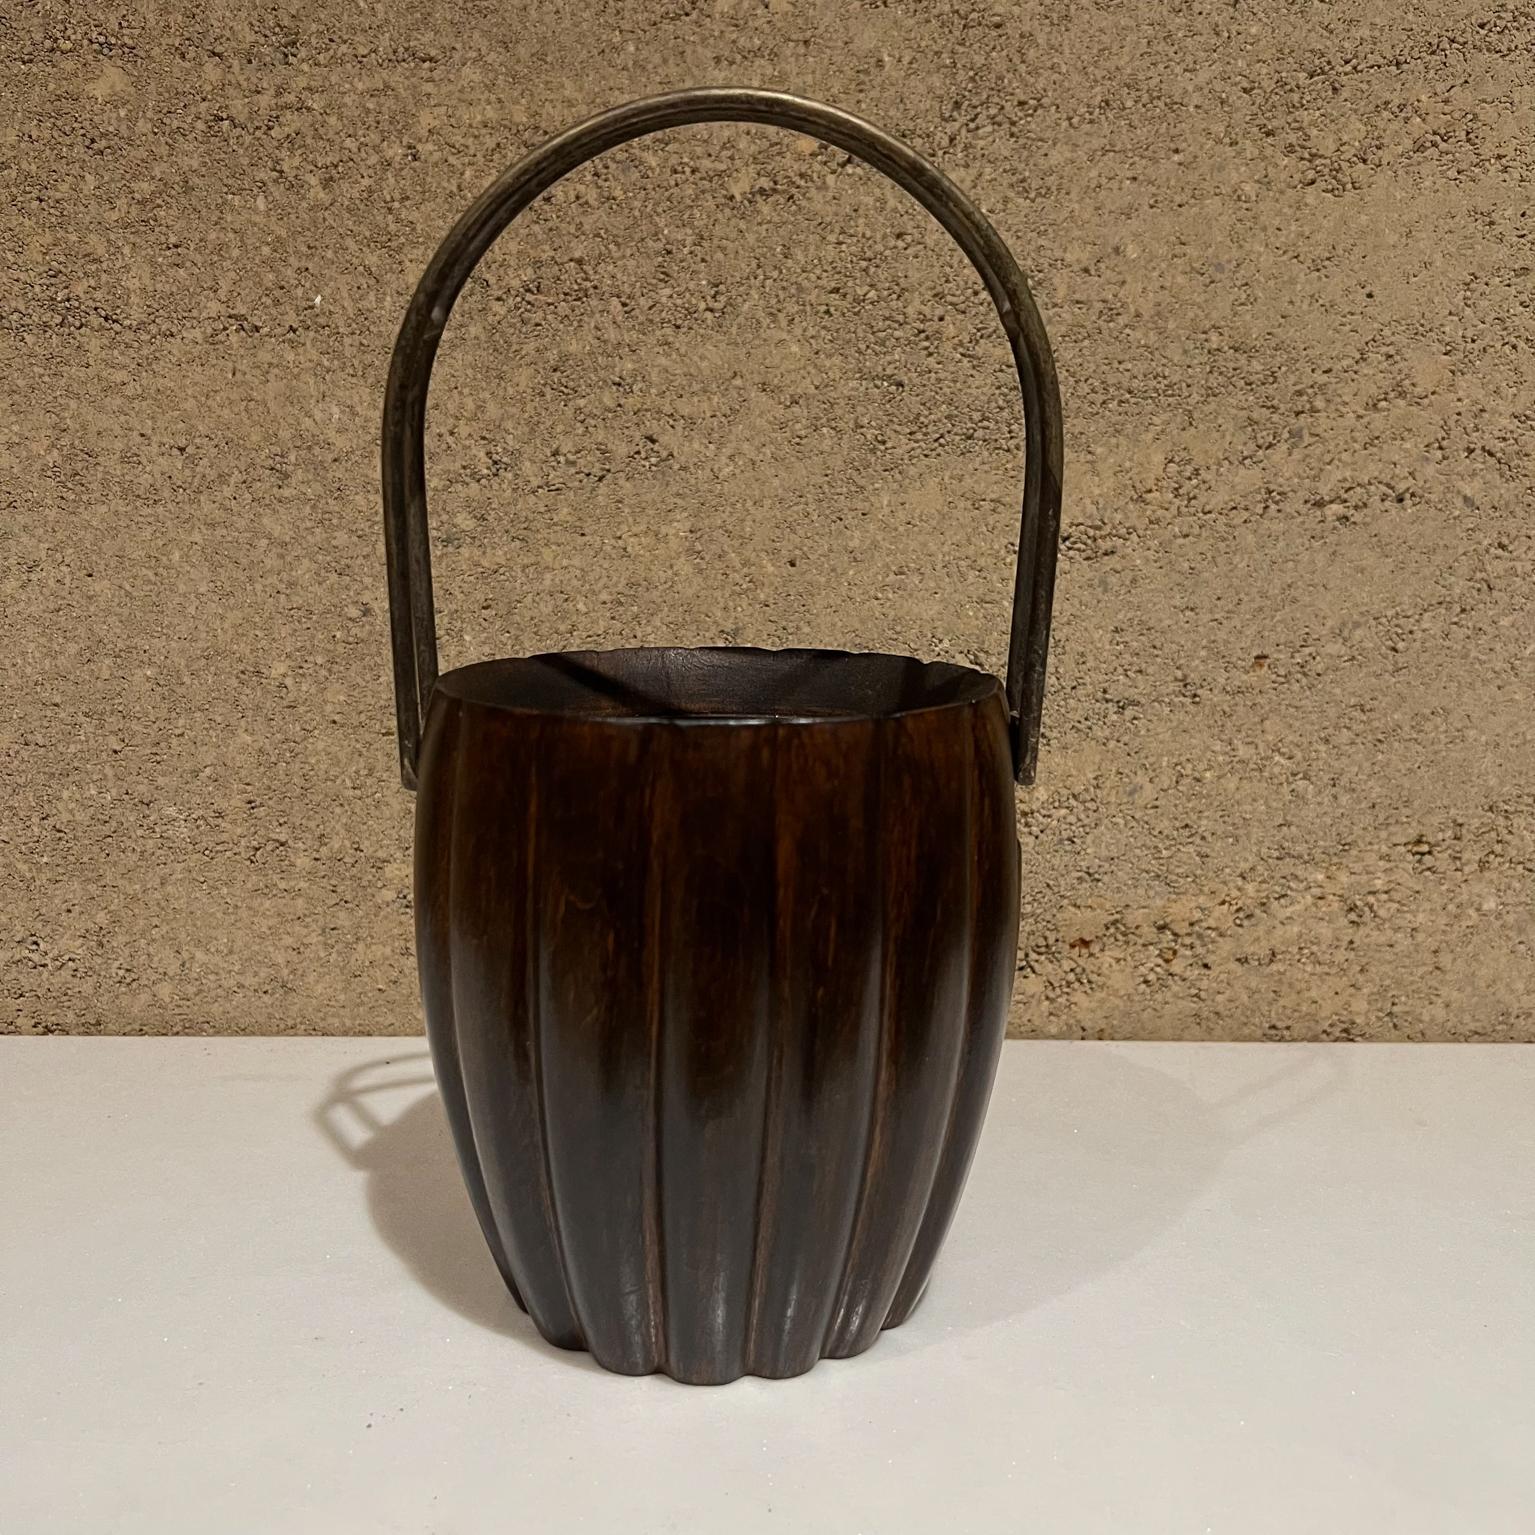 Milano Vintage Mid-Century Modern Macabo Cusano wood and brass handle basket, Italy 1950s
By Aldo Tura for Macabo Cusano.
Measures: 11 tall x 5.5 diameter
Original vintage restored finish preowned condition. 
Refer to images.


